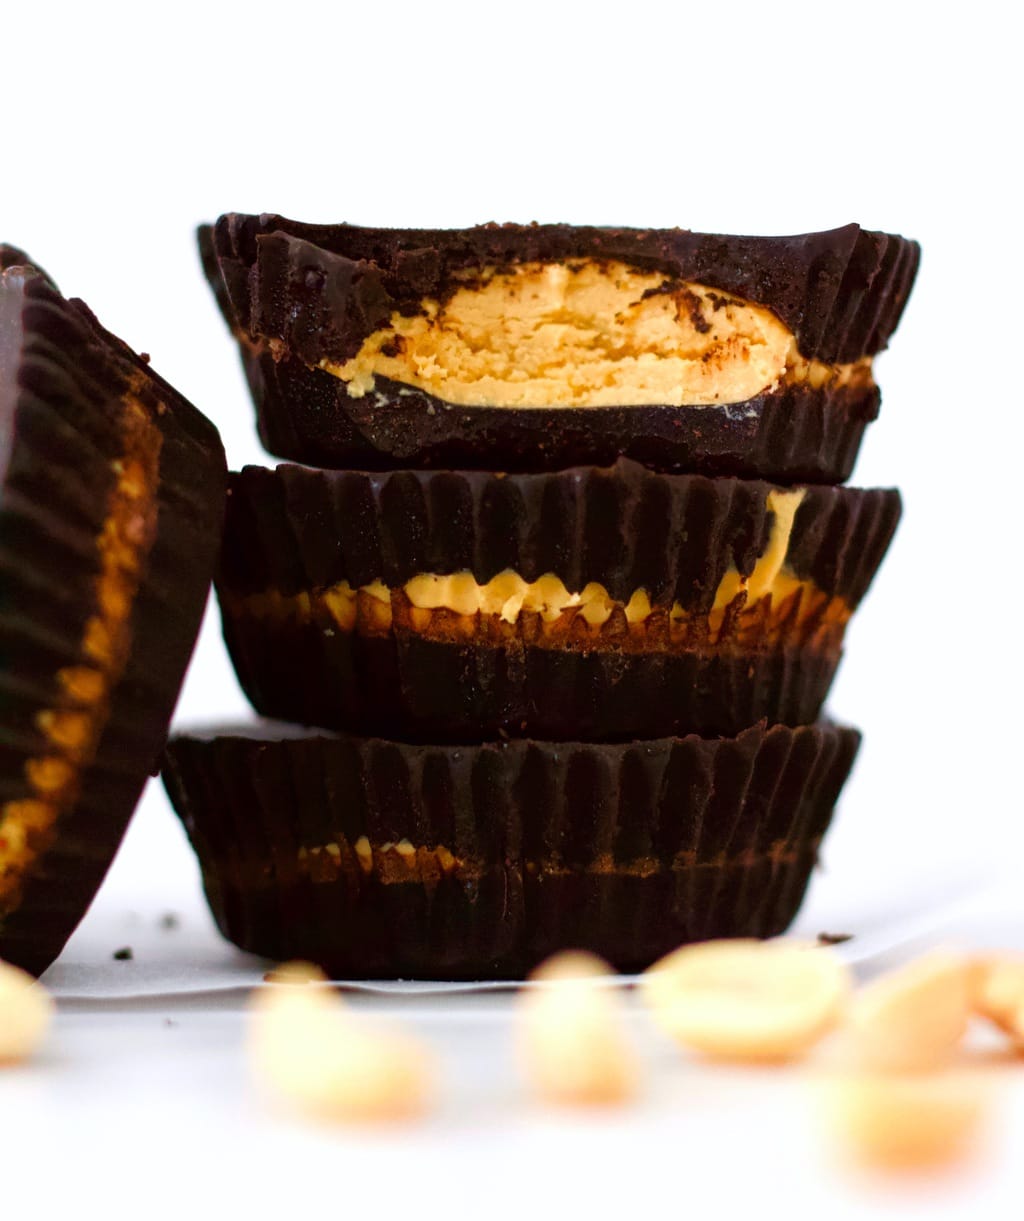 These Keto Vegan Reese's Peanut Butter cups are totally amazing! They taste JUST like the real thing! They're also gluten-free, sugar-free, low-carb & dairy-free.